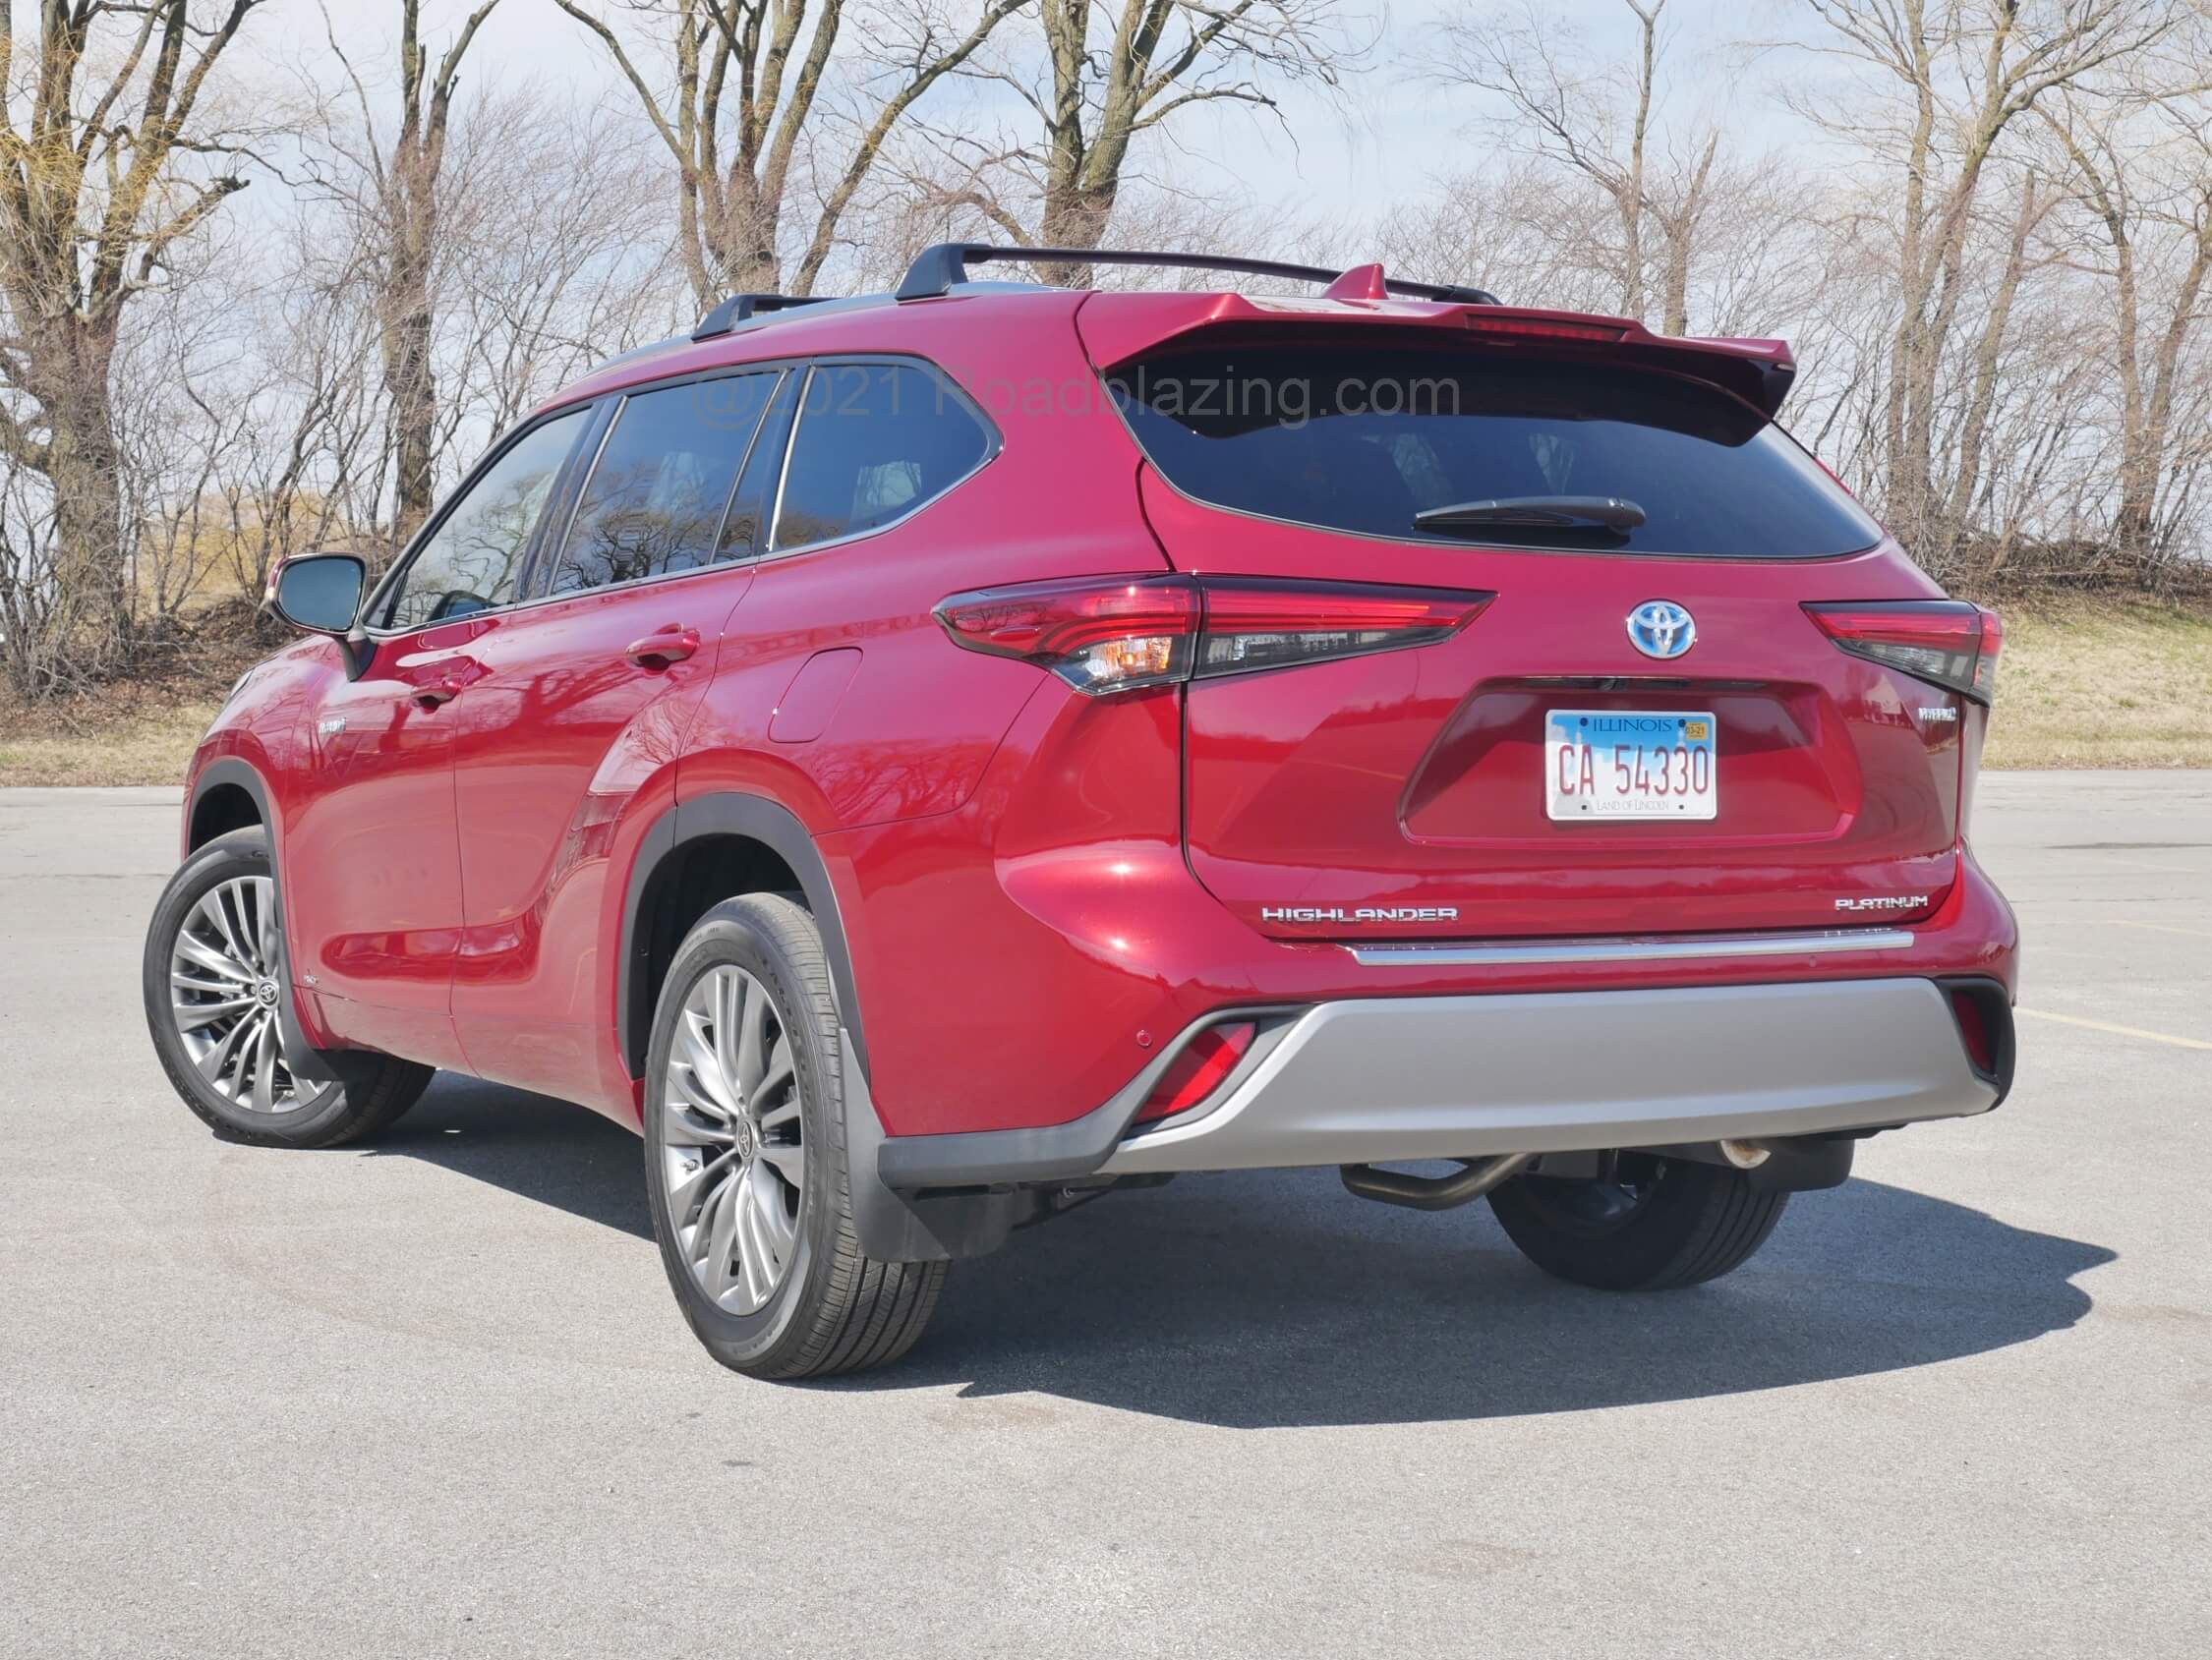 2020 Toyota Highlander Hybrid Platinum AWD: Simulated skidplates offer attractive contrast to Ruby Flare Pearl body color